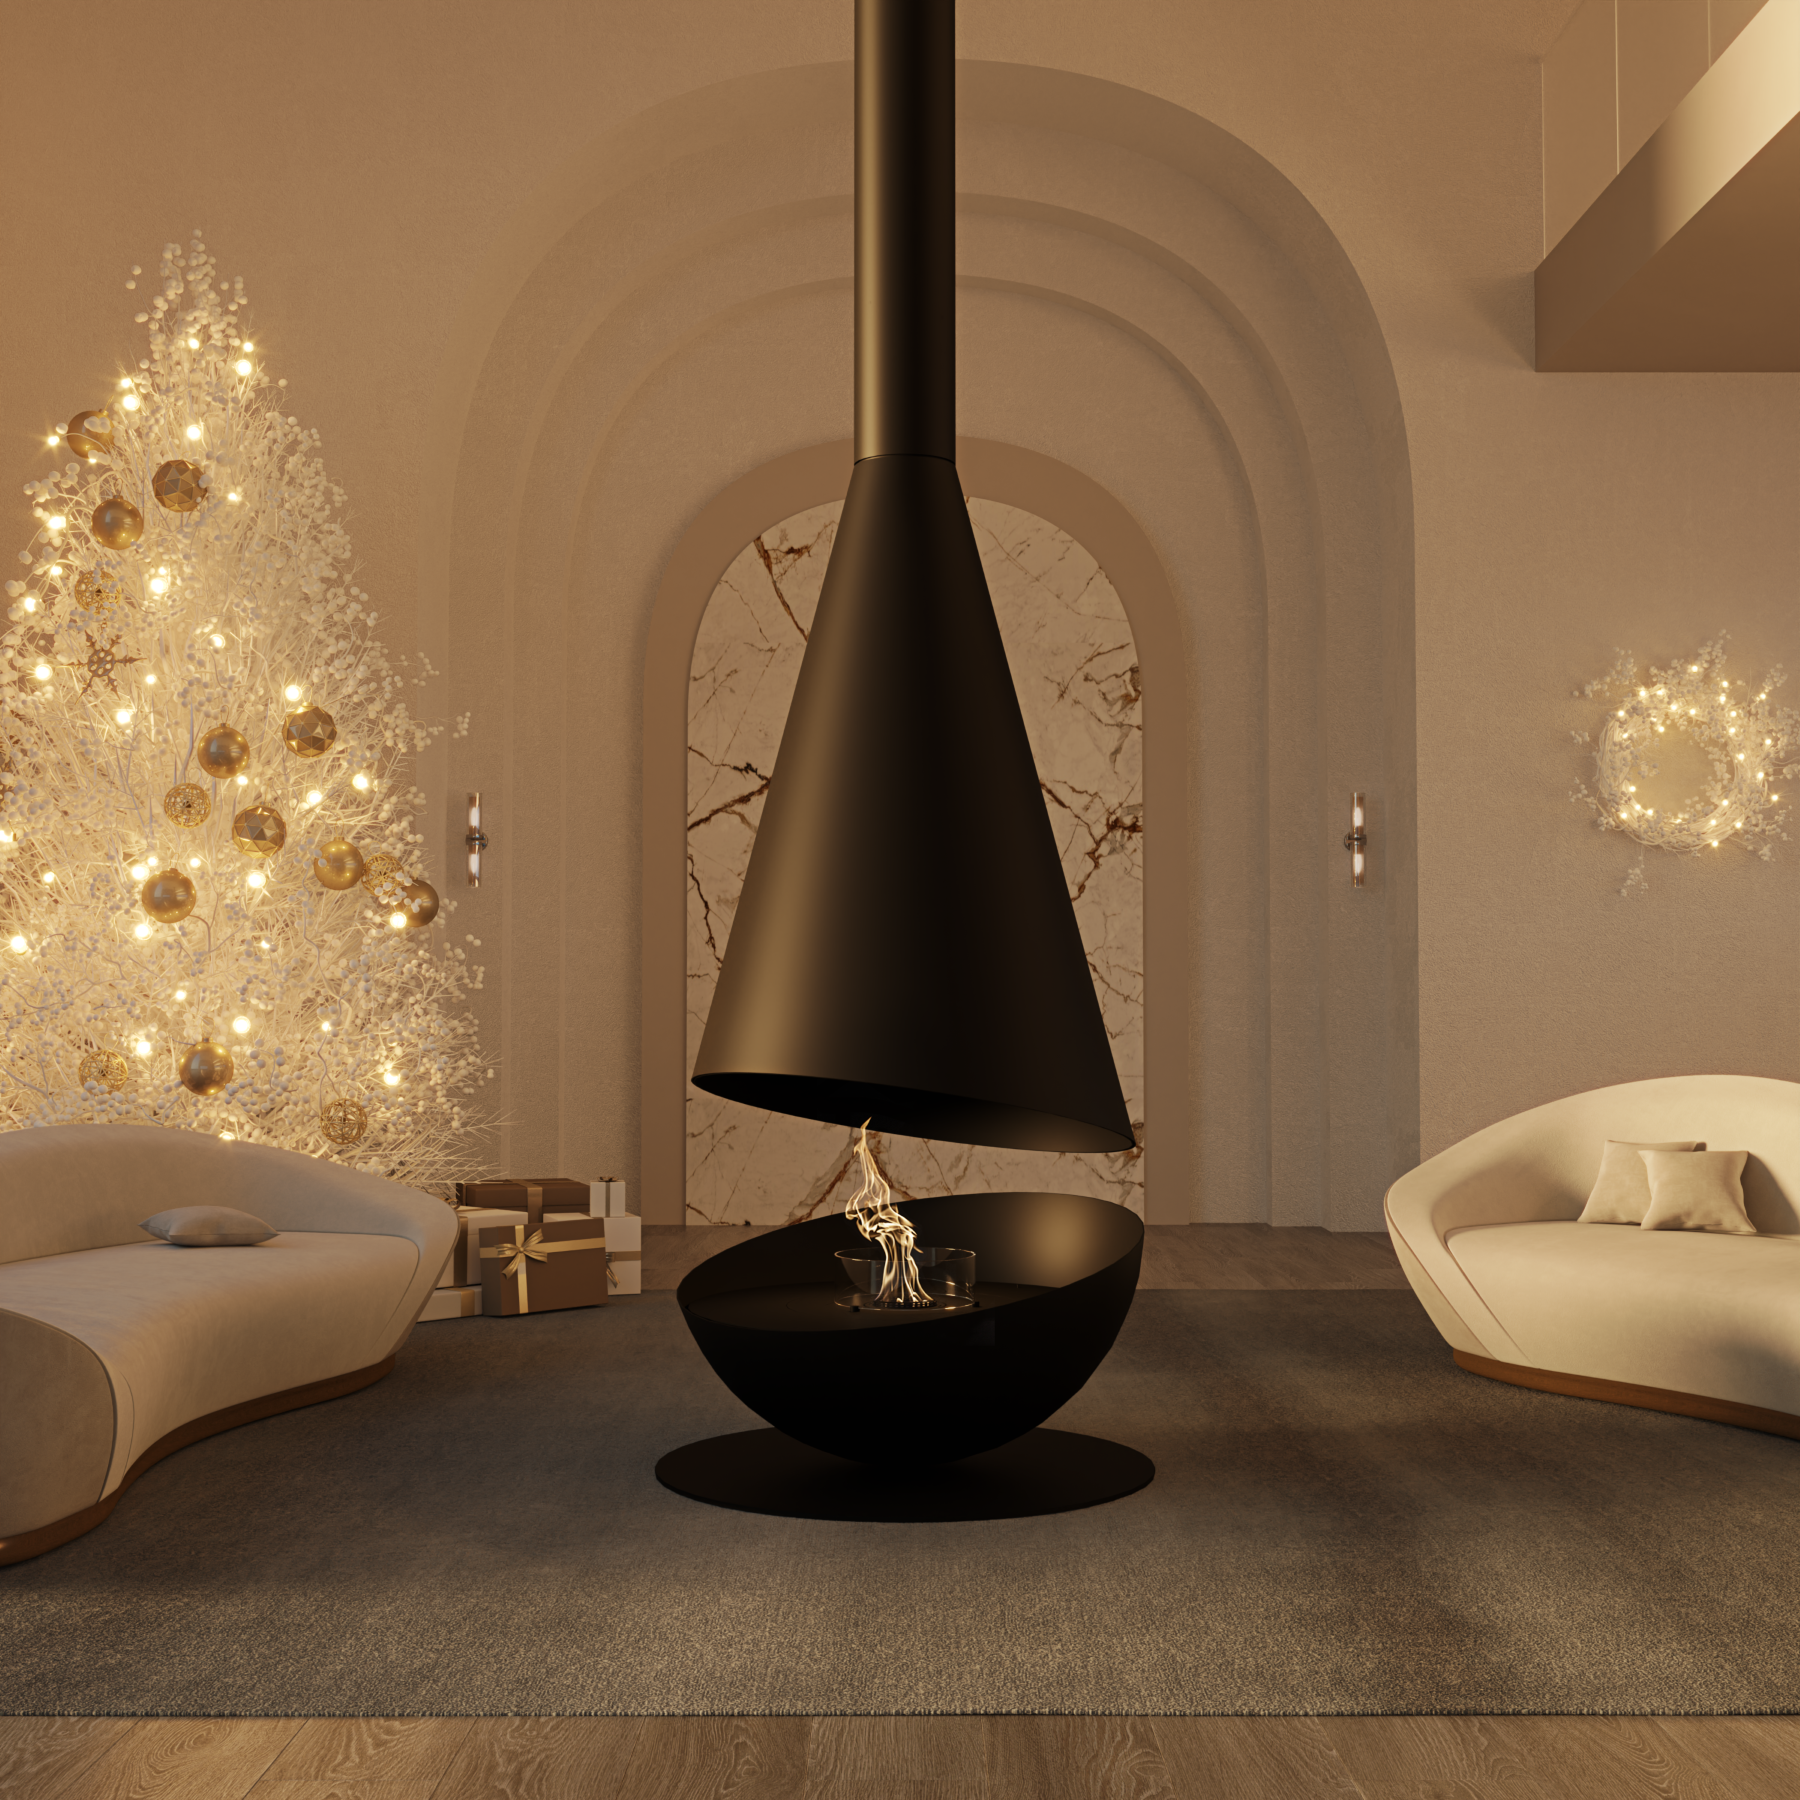 THALES Black in living room. Central focus between white sofas and white Christmas tree in the background.